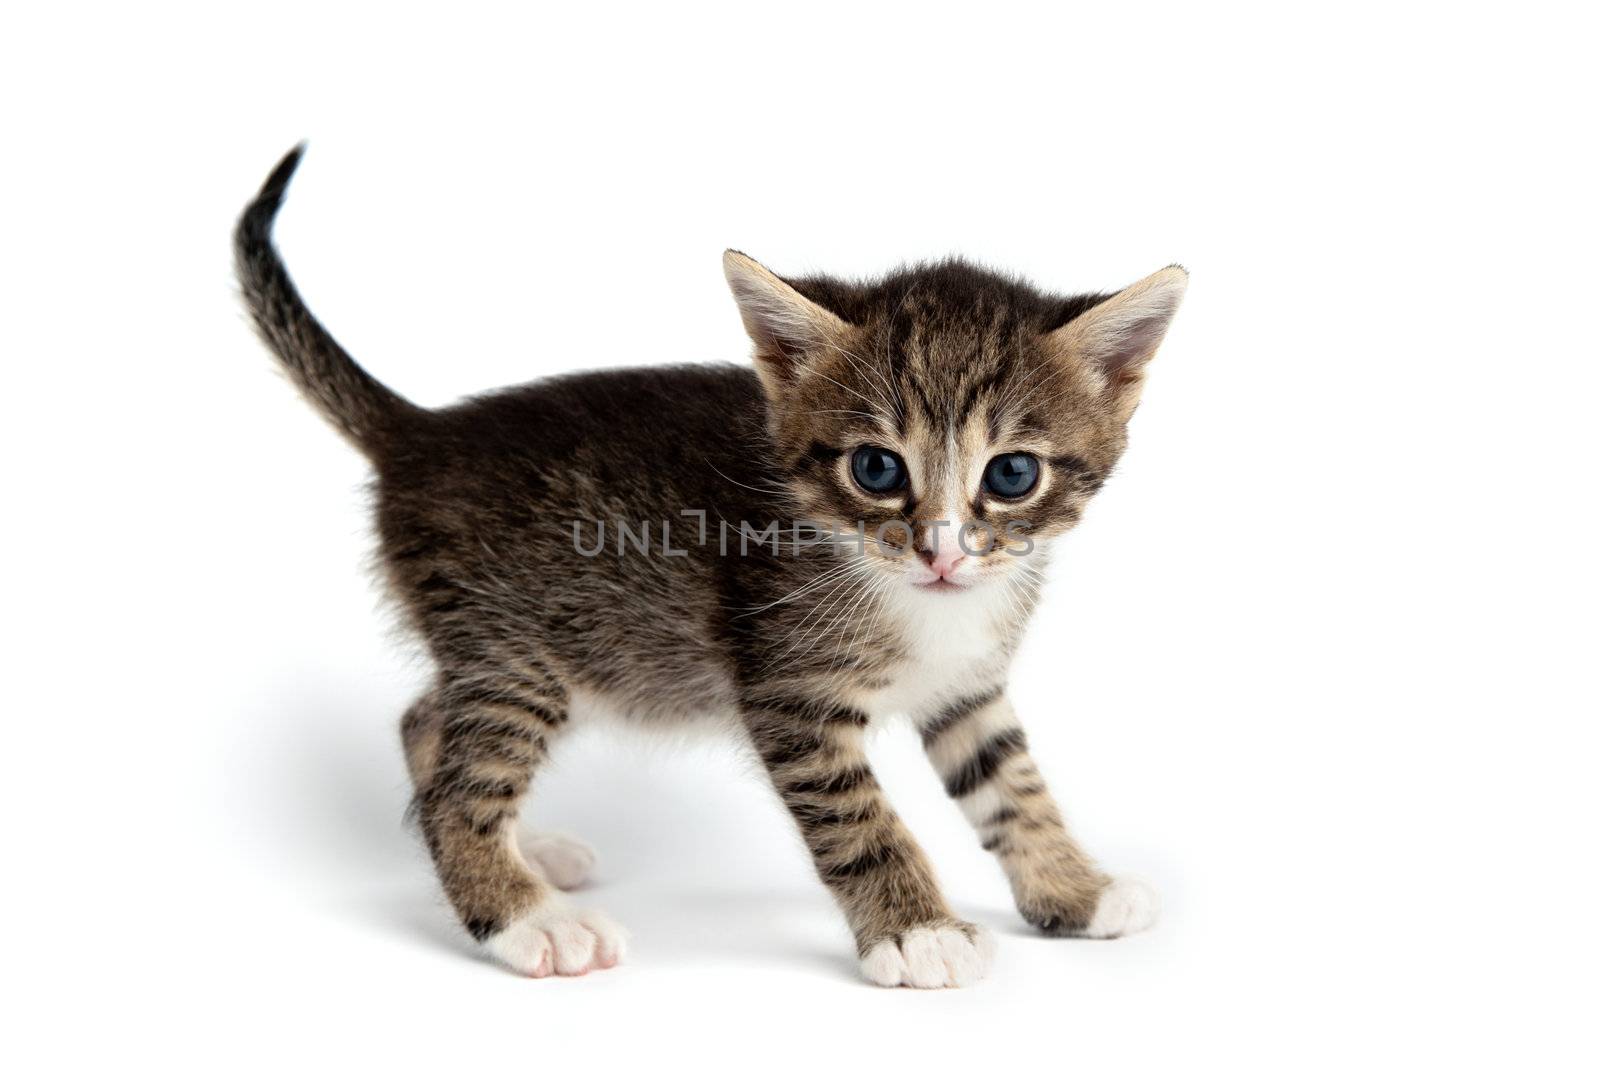 An image of a tiny little kitten on white background